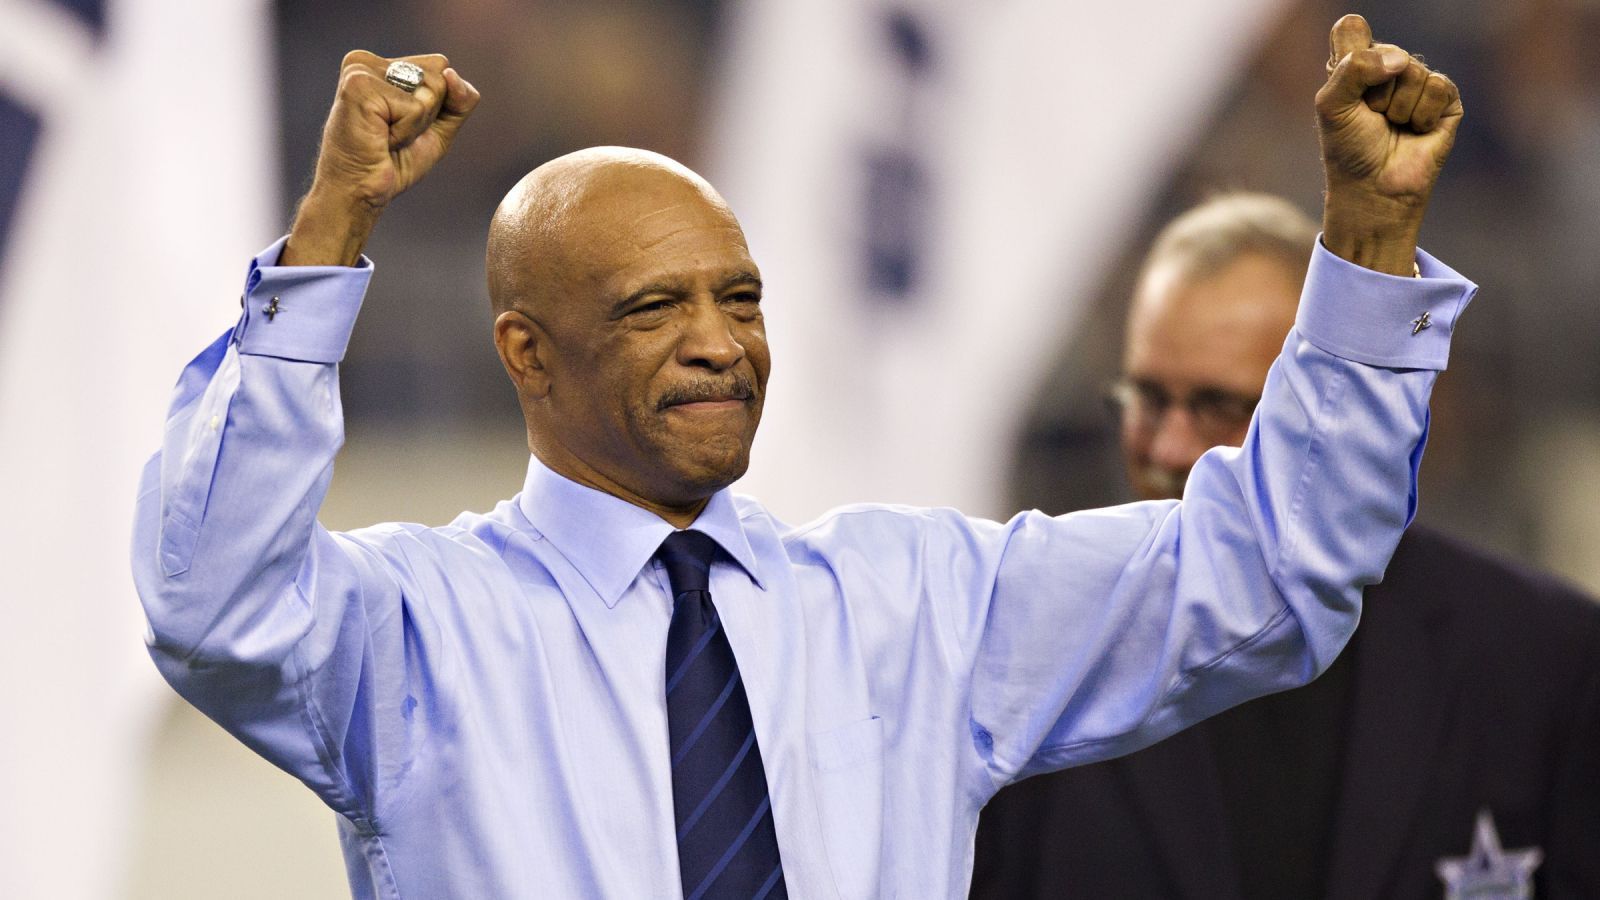 
                <strong>2021: Drew Pearson</strong><br>
                &#x2022; Position: Wide Receiver -<br>&#x2022; In der NFL: 1973 bis 1983 -<br>&#x2022; Team: Dallas Cowboys<br>
              